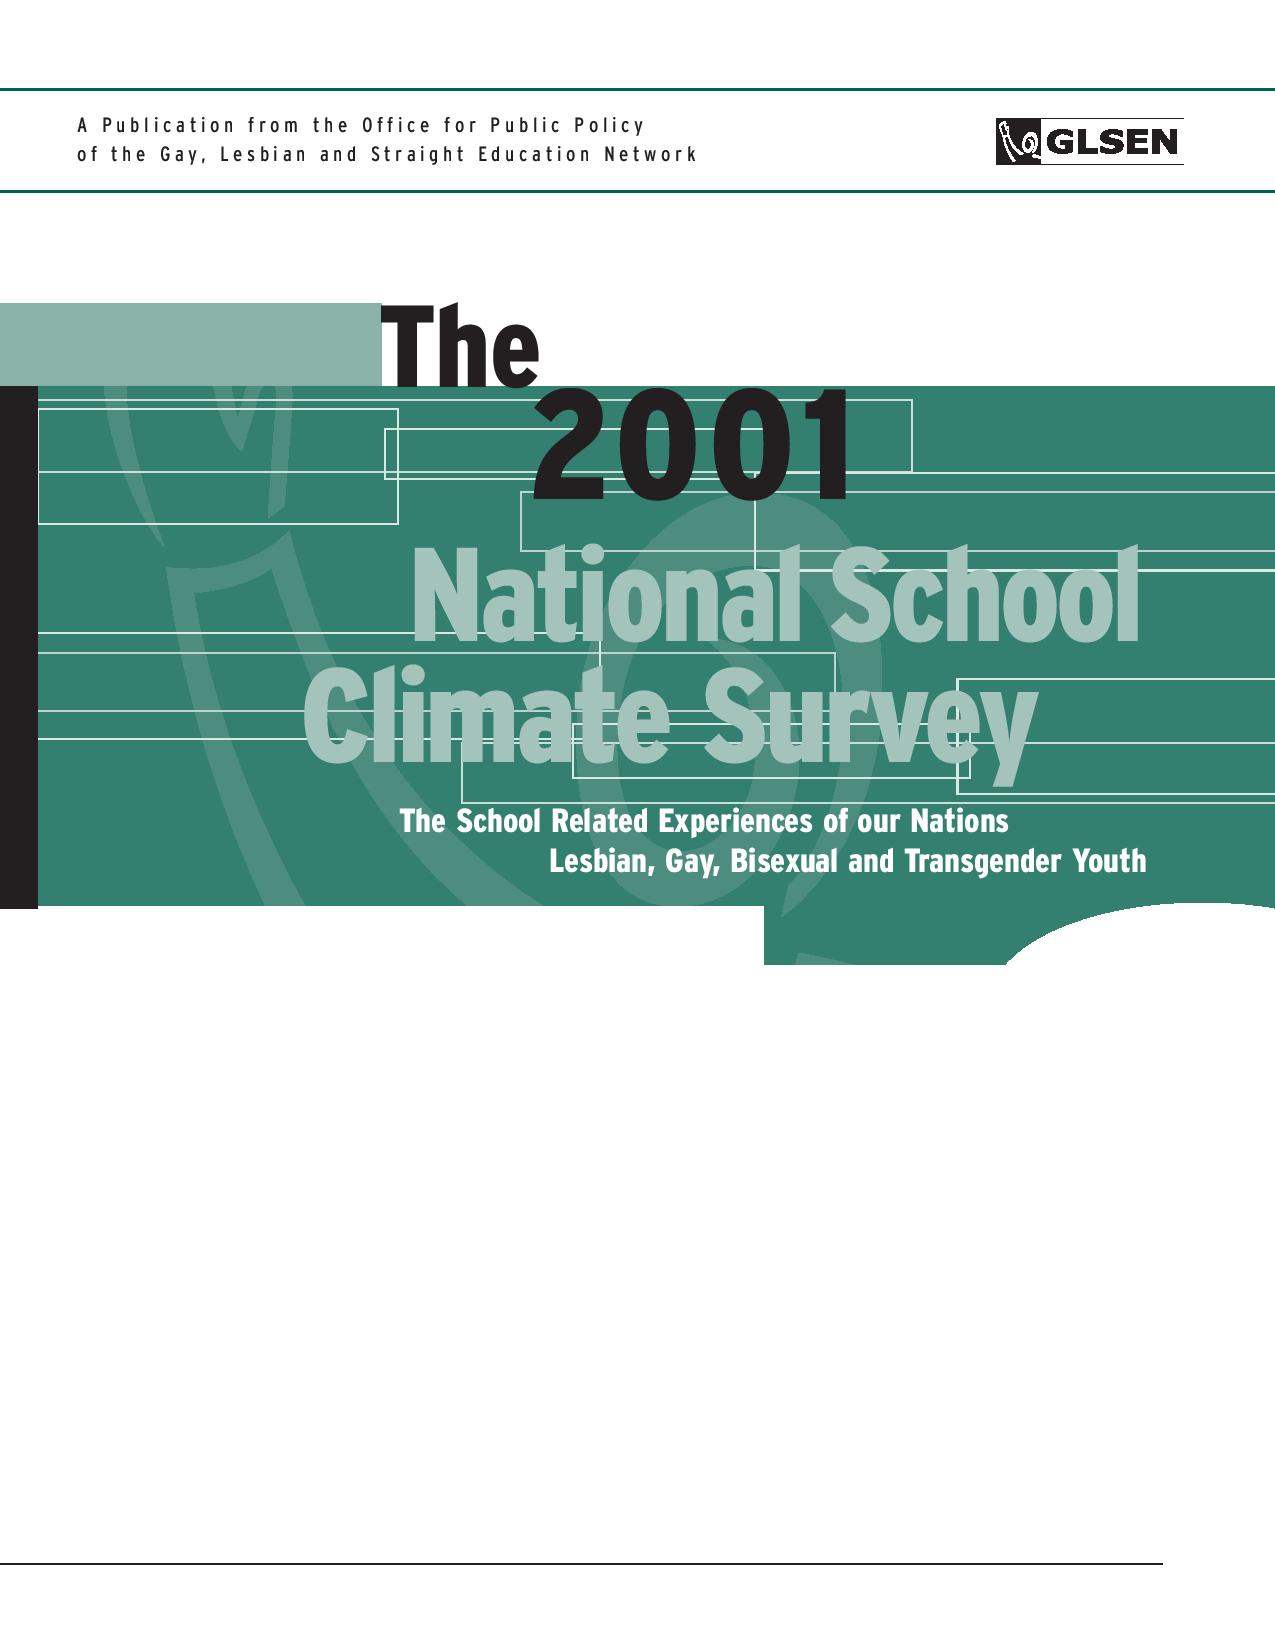 2001 National School Climate Survey Full Report-page